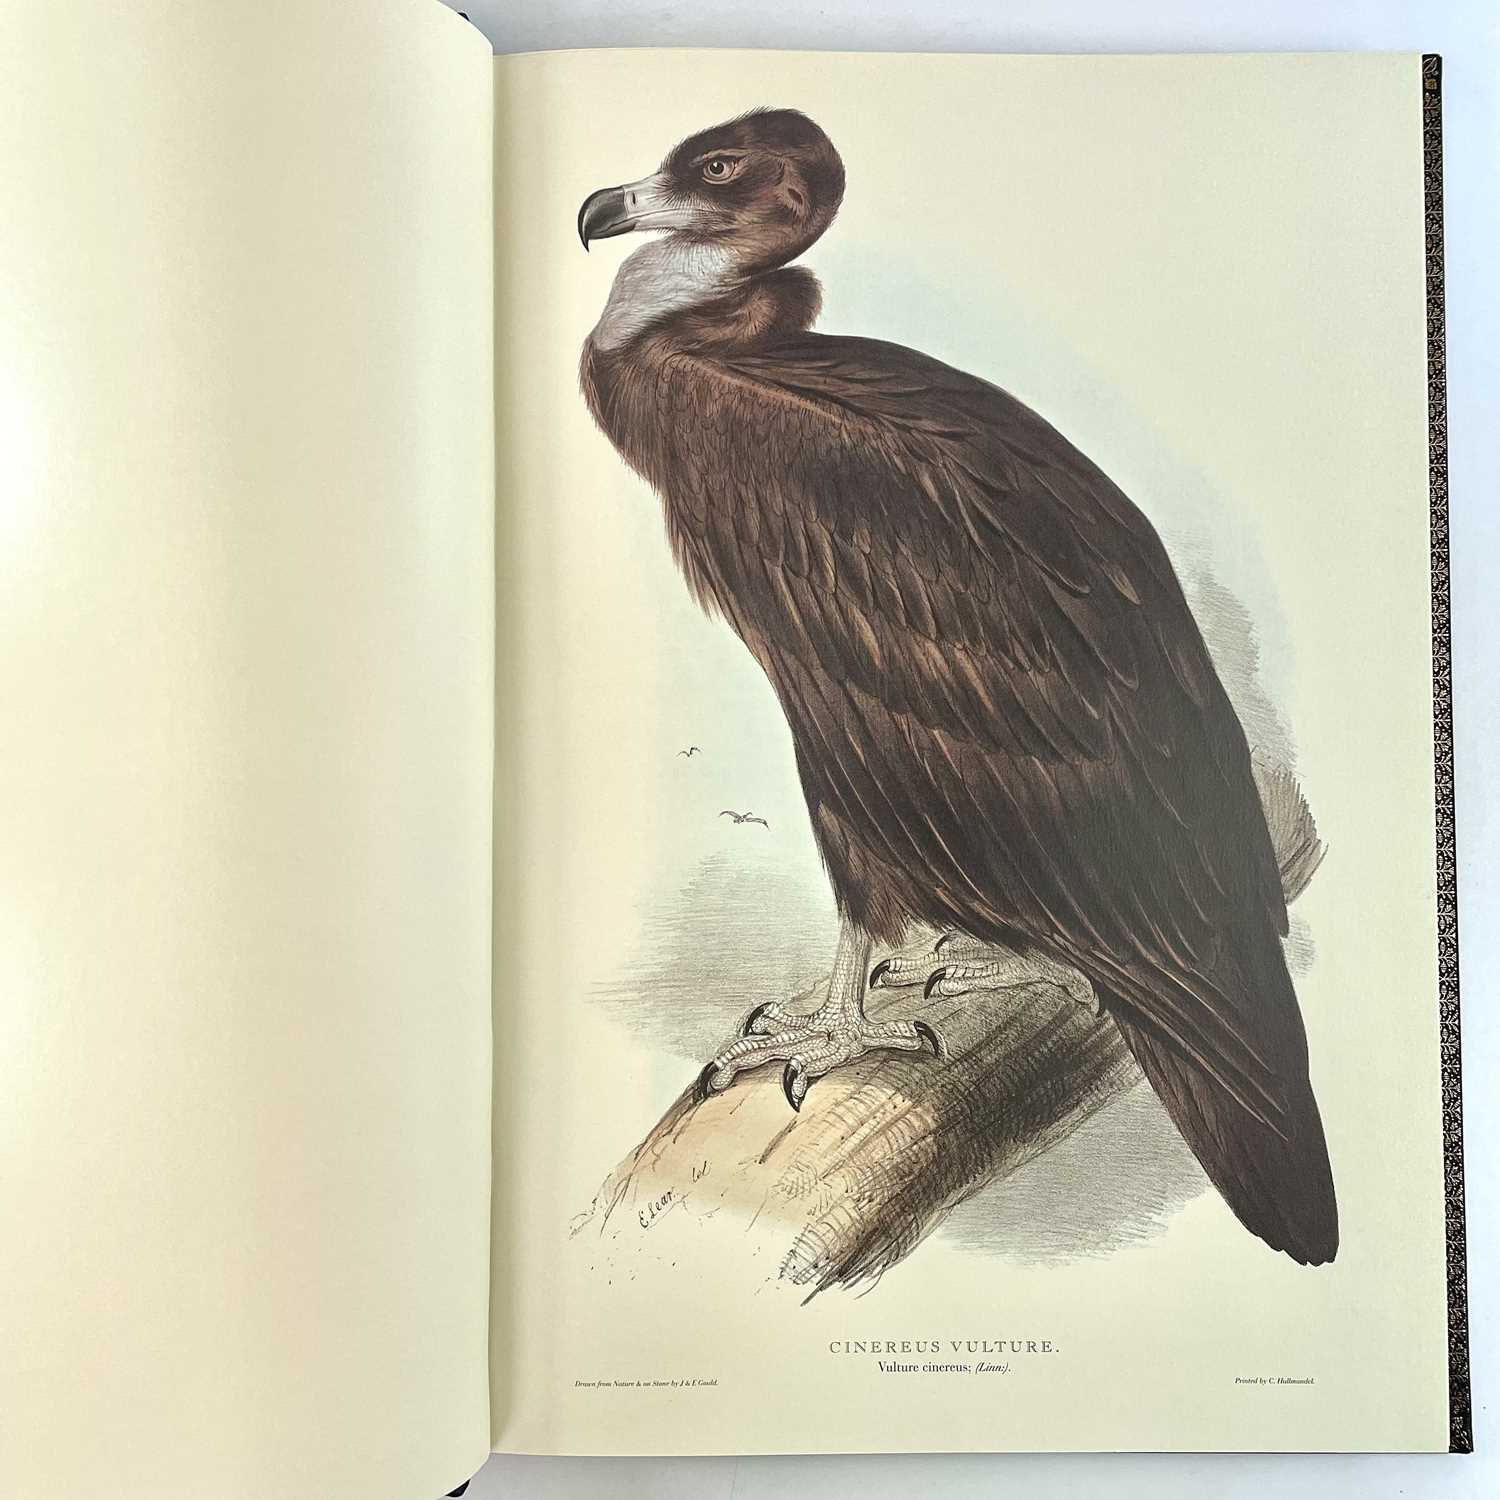 FOLIO SOCIETY SIGNED LIMITED EDITION. 'Illustrations of Birds Drawn for John Gould by Edward - Image 21 of 25